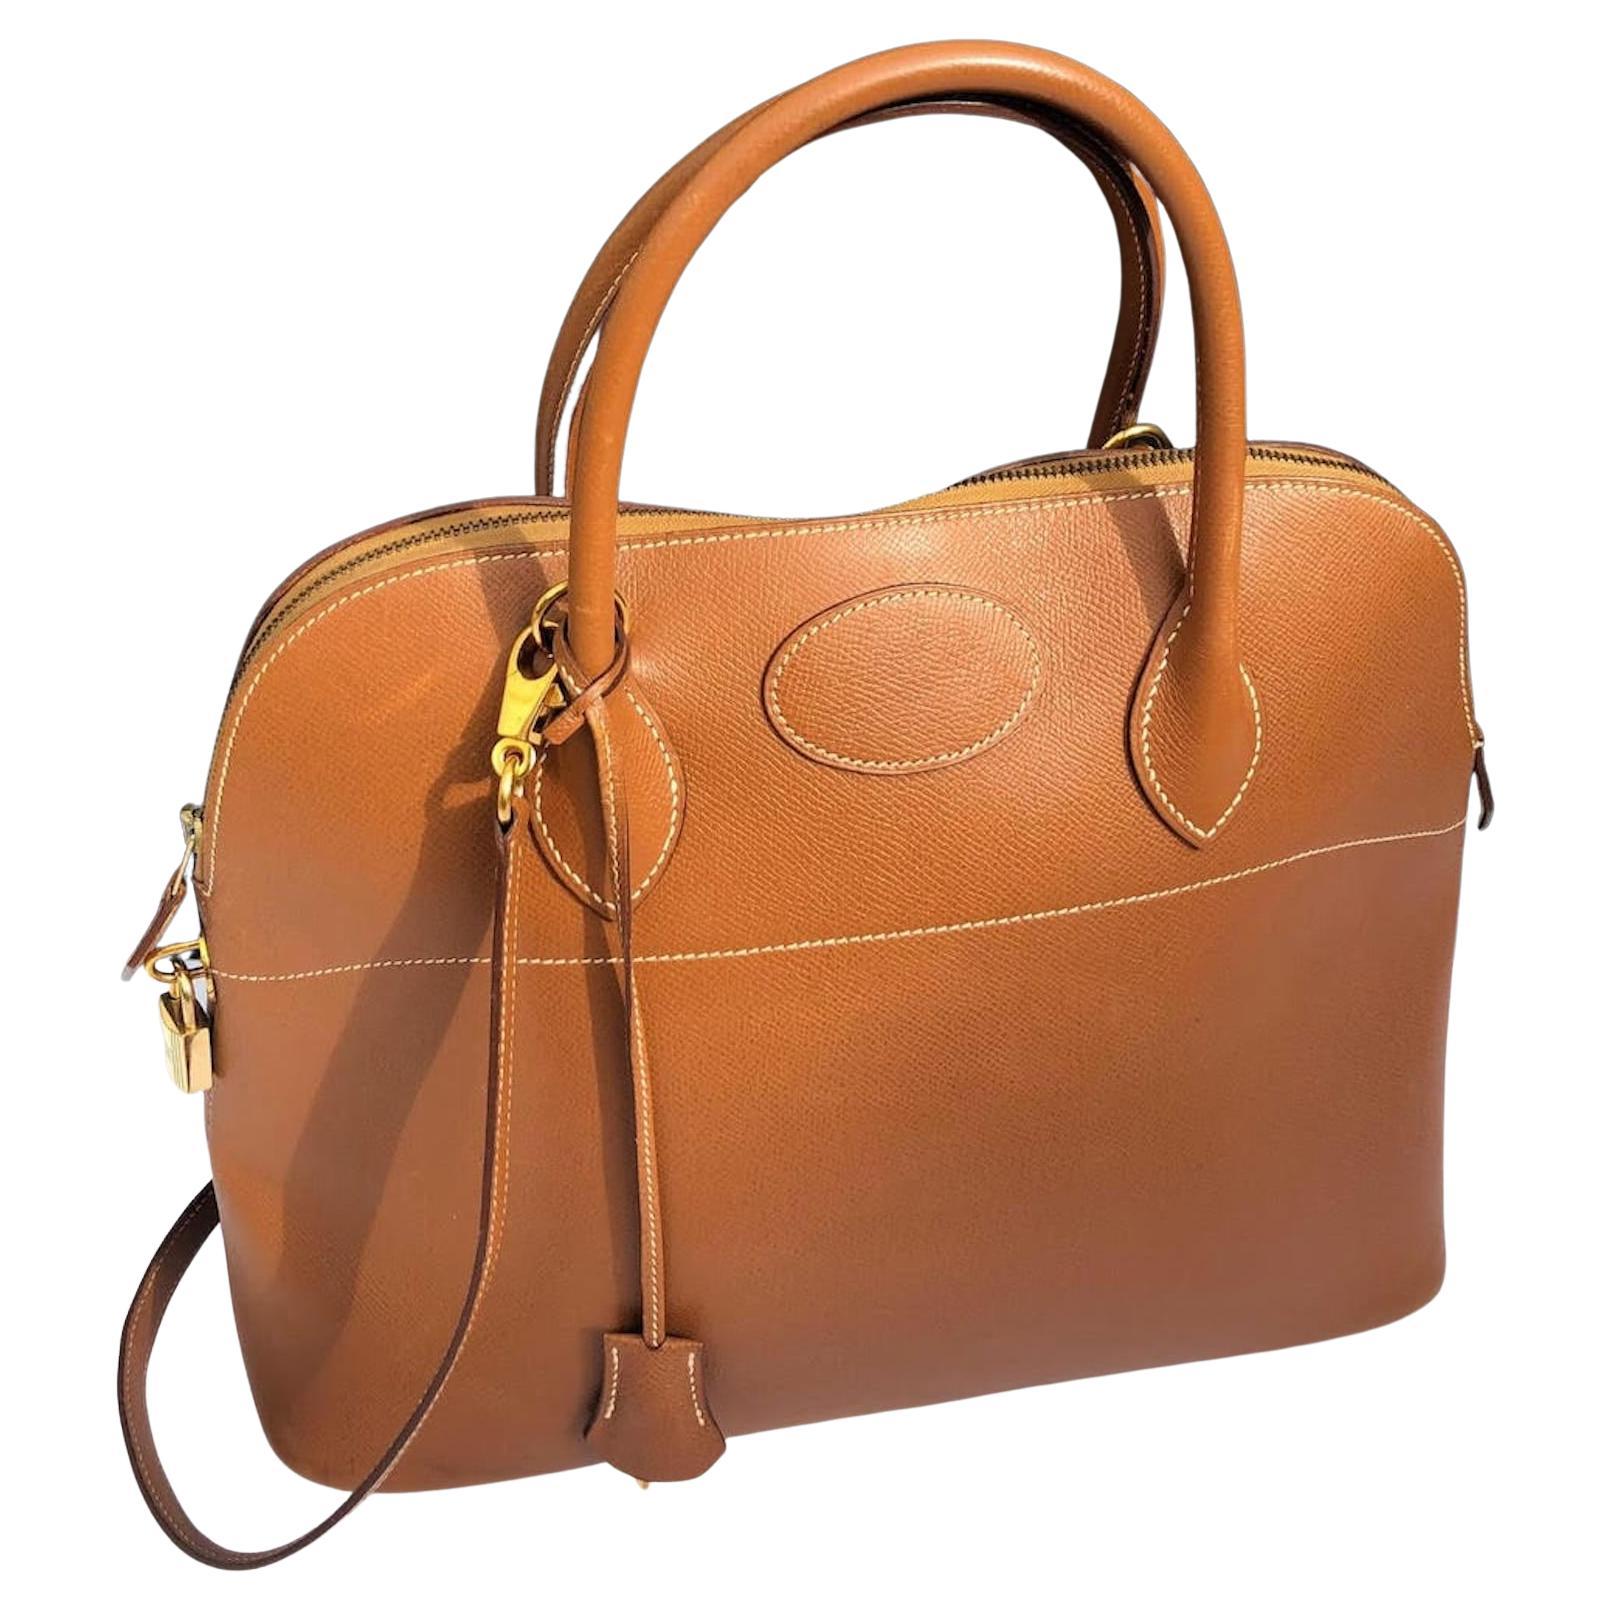 HERMÈS Bolide 1995 Tan Leather Bag GHW Vintage
A timeless classic vintage 1995 Hermès Bolide bag in cavalerie tan-gold colour in Courchevel leather with shoulder strap, key fob and keys. This 28 years old Bolide has kept its beautiful shape, the